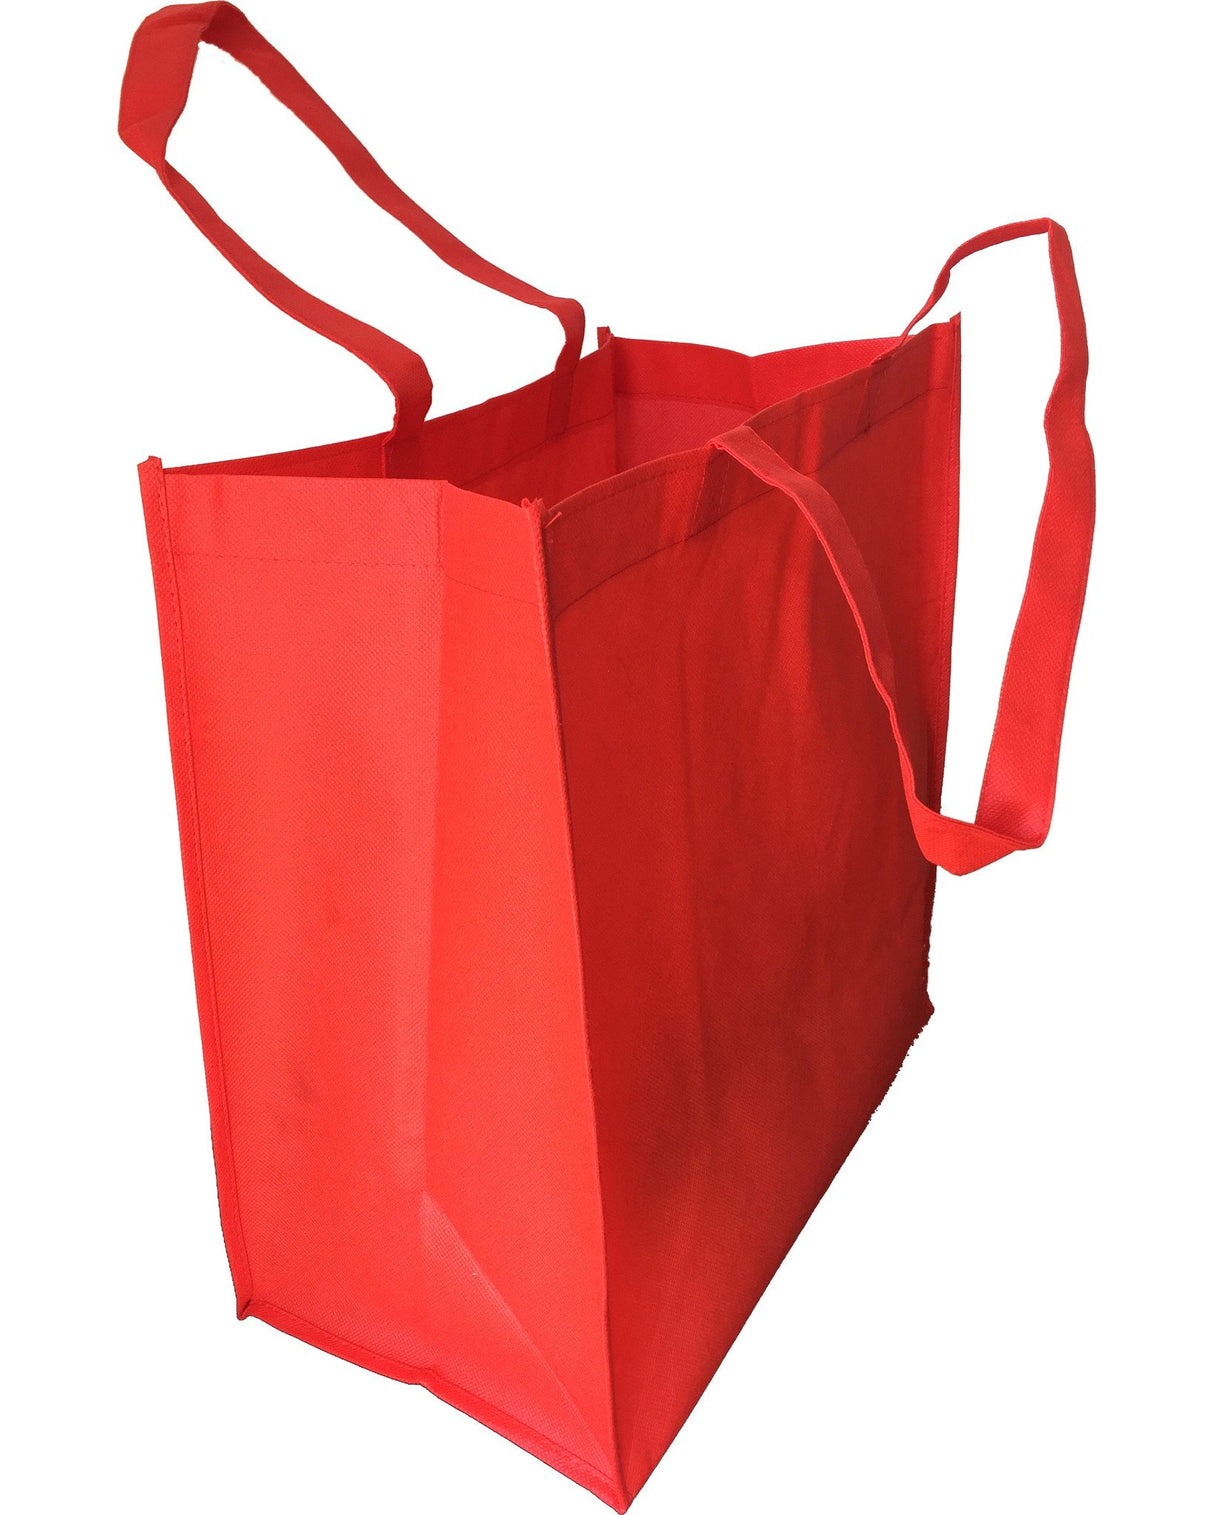 Cheap Large Grocery Red Tote Bags